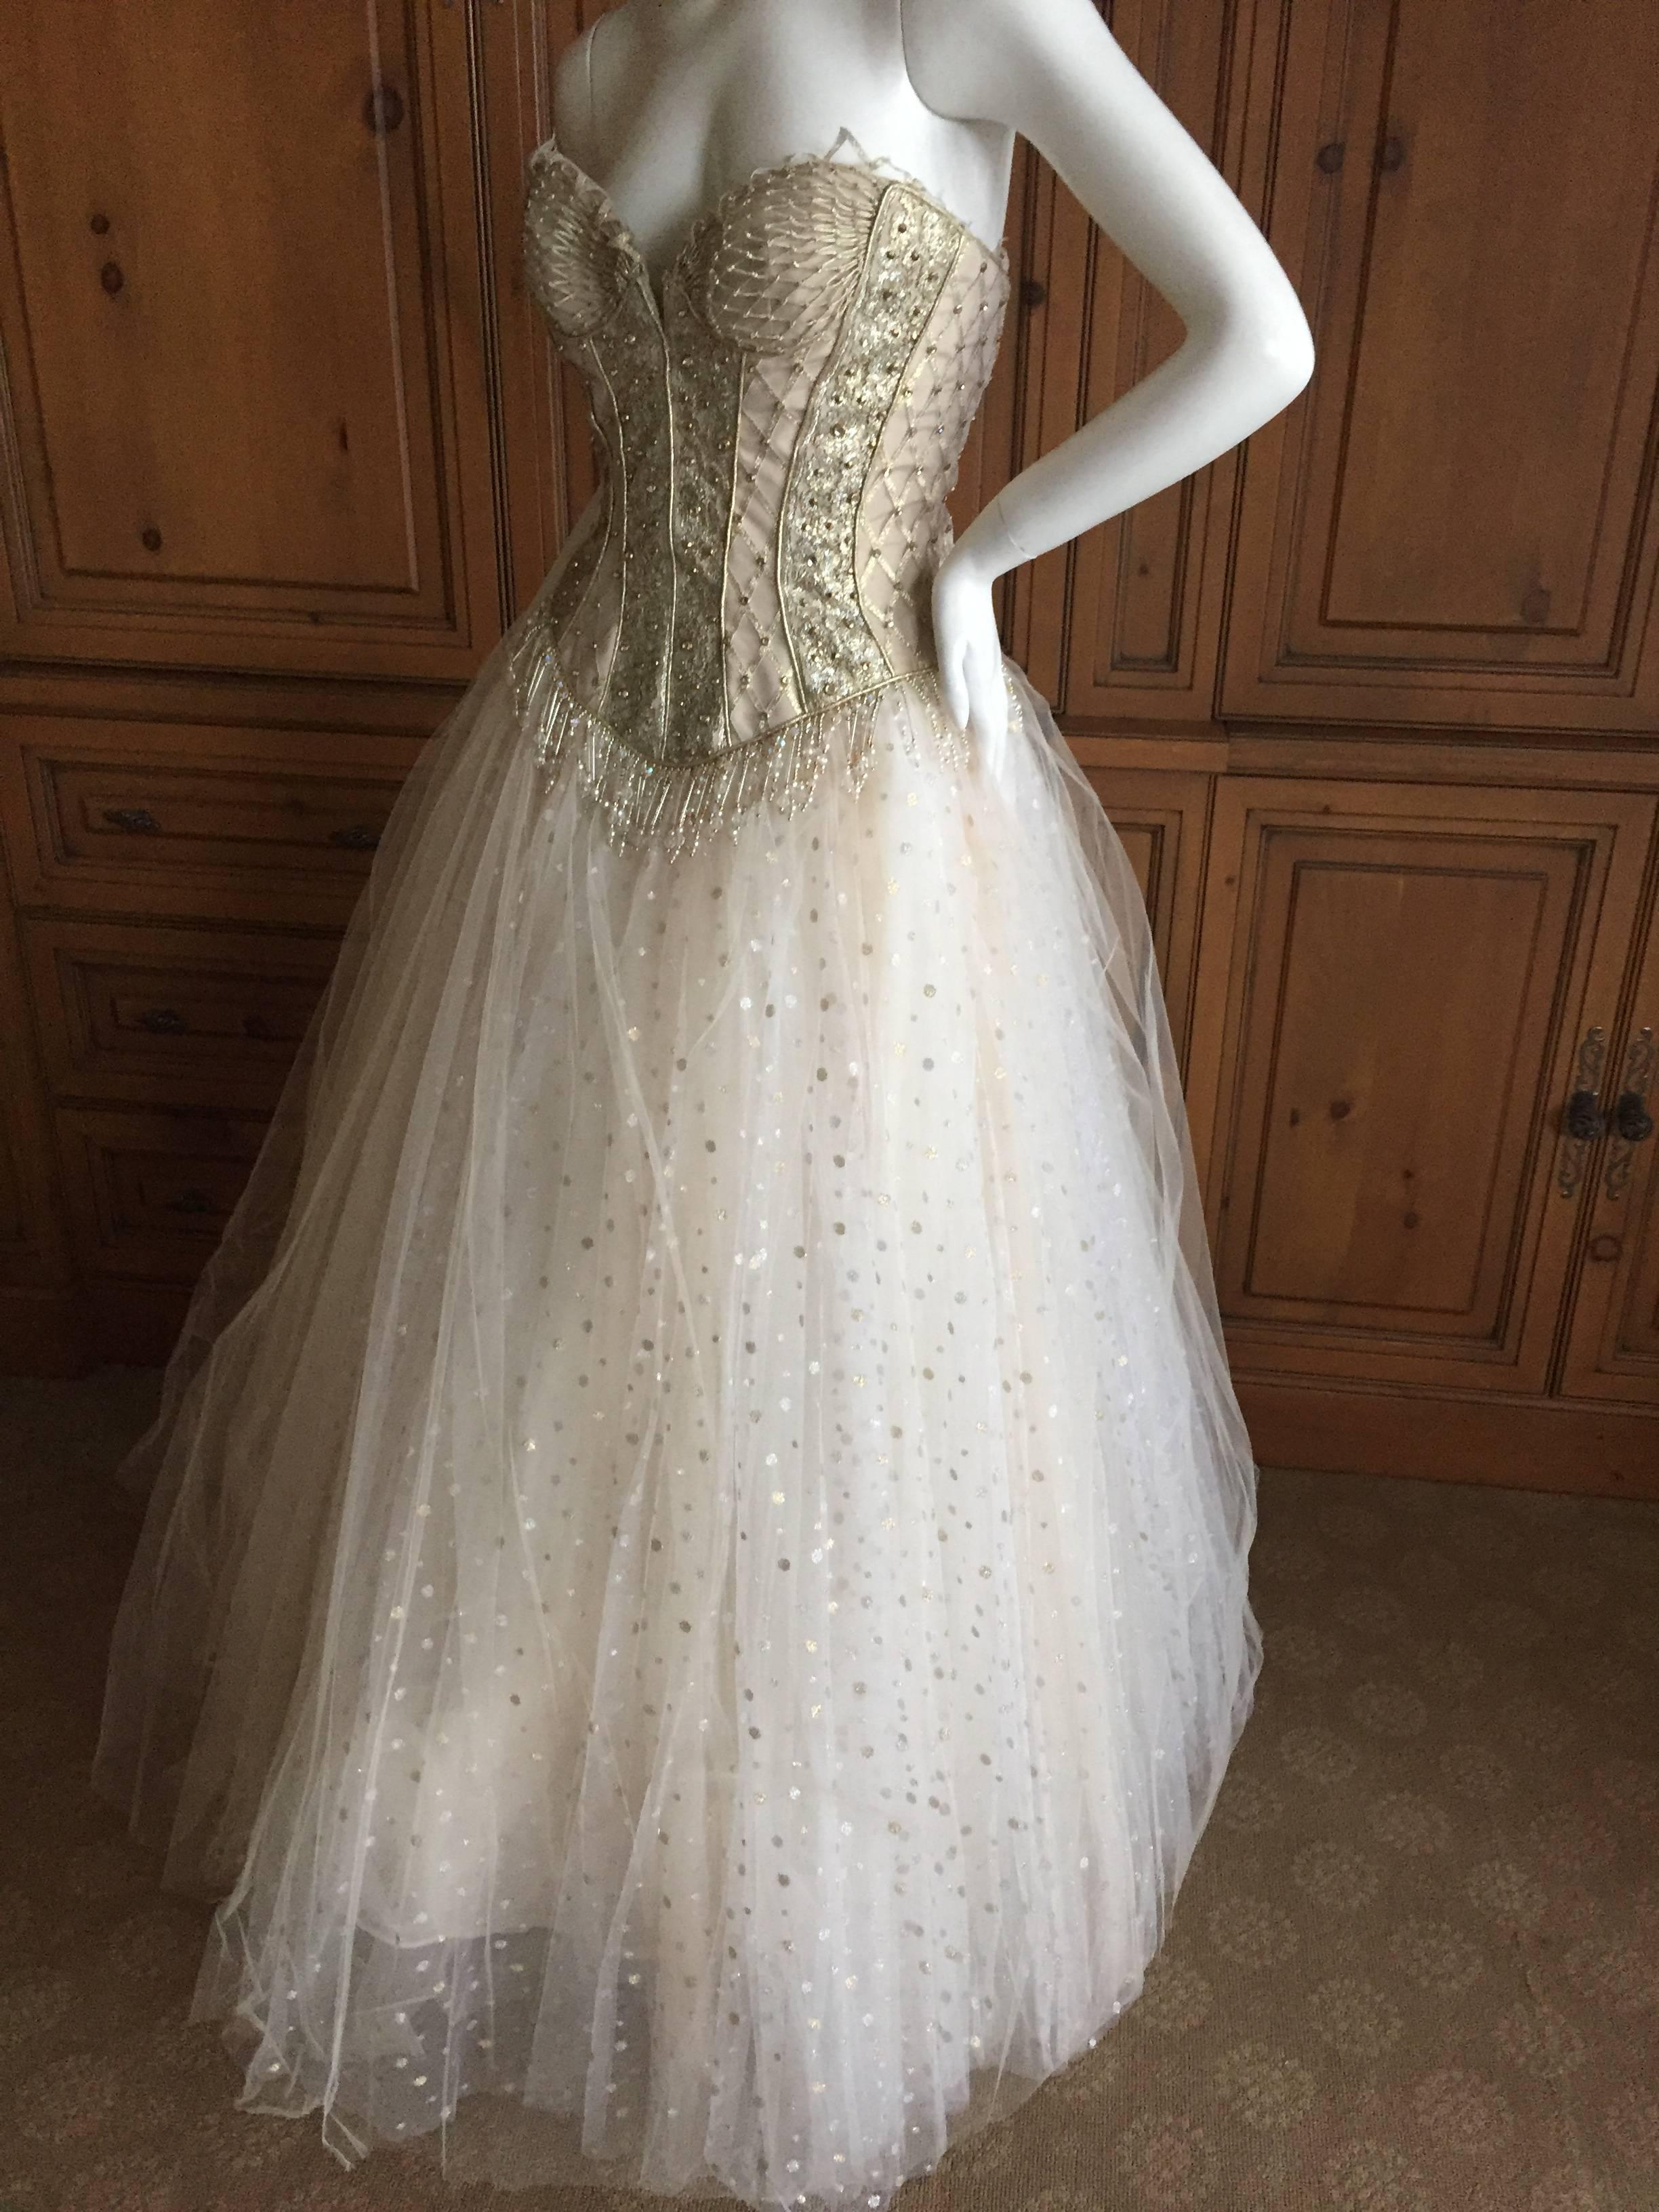 Bob Mackie One of a Kind Ballerina (Wedding) Dress In Excellent Condition For Sale In Cloverdale, CA